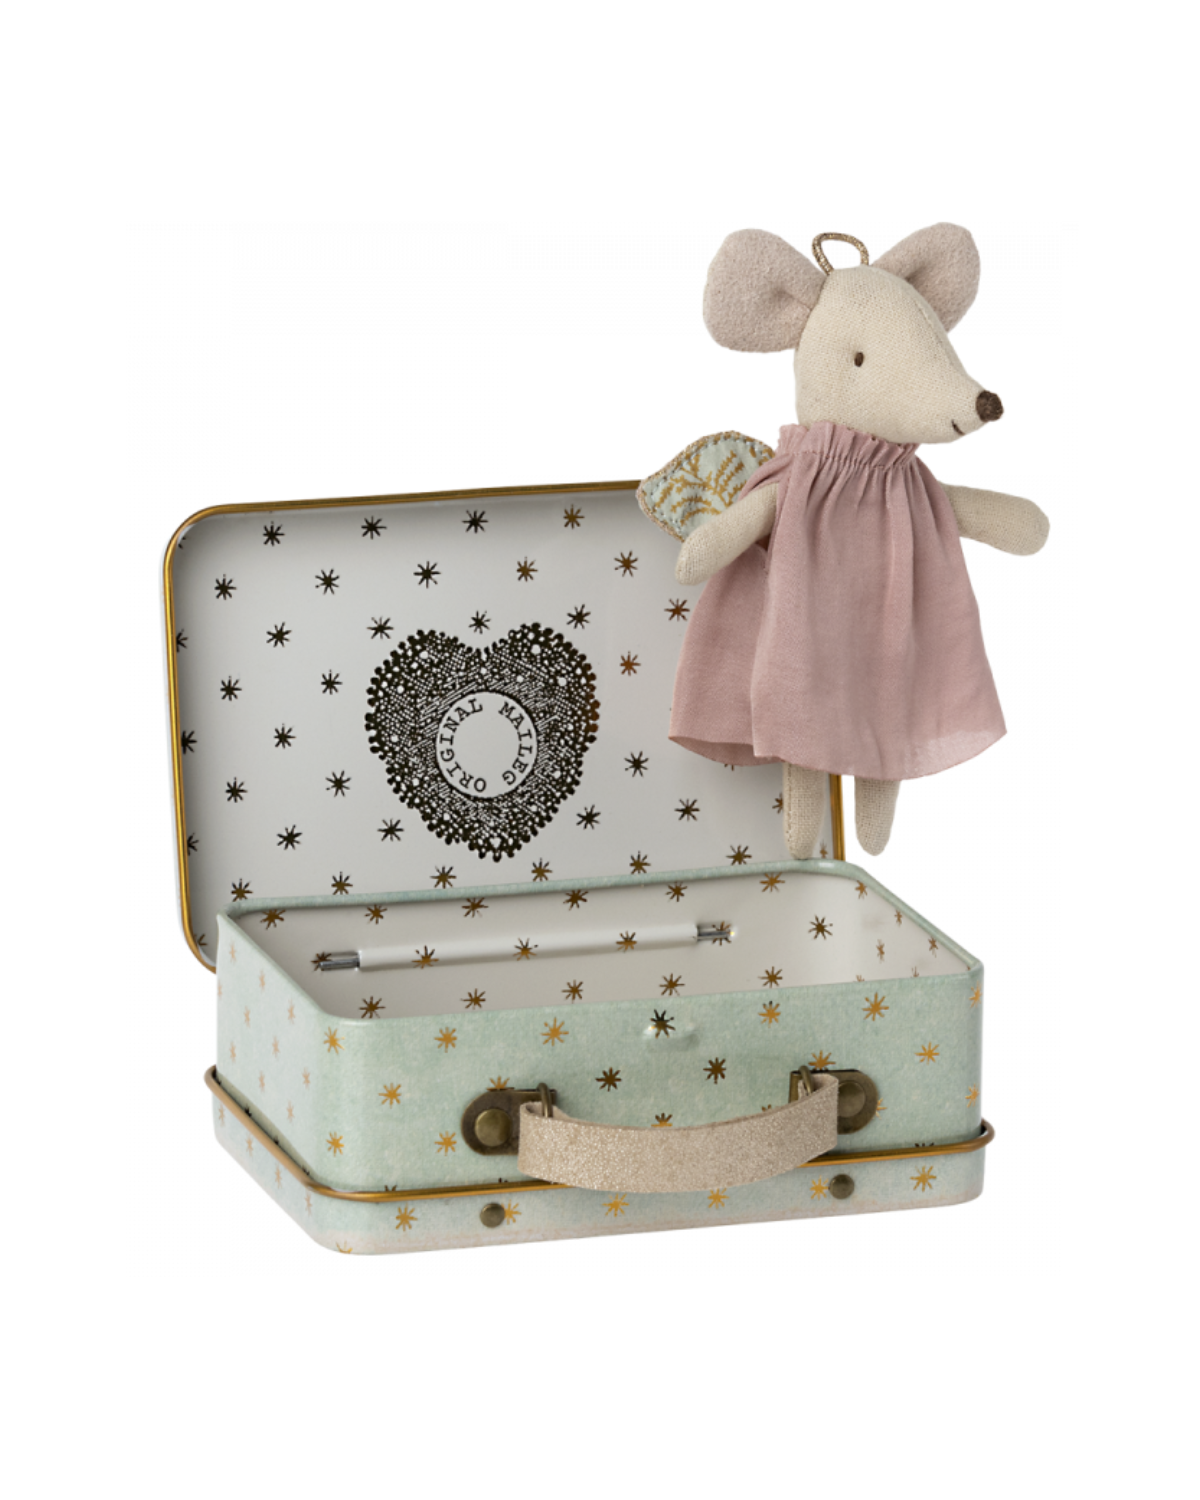 Angel Mouse in Suitcase - Heavenly Maileg Doll for Kids, Maileg toys